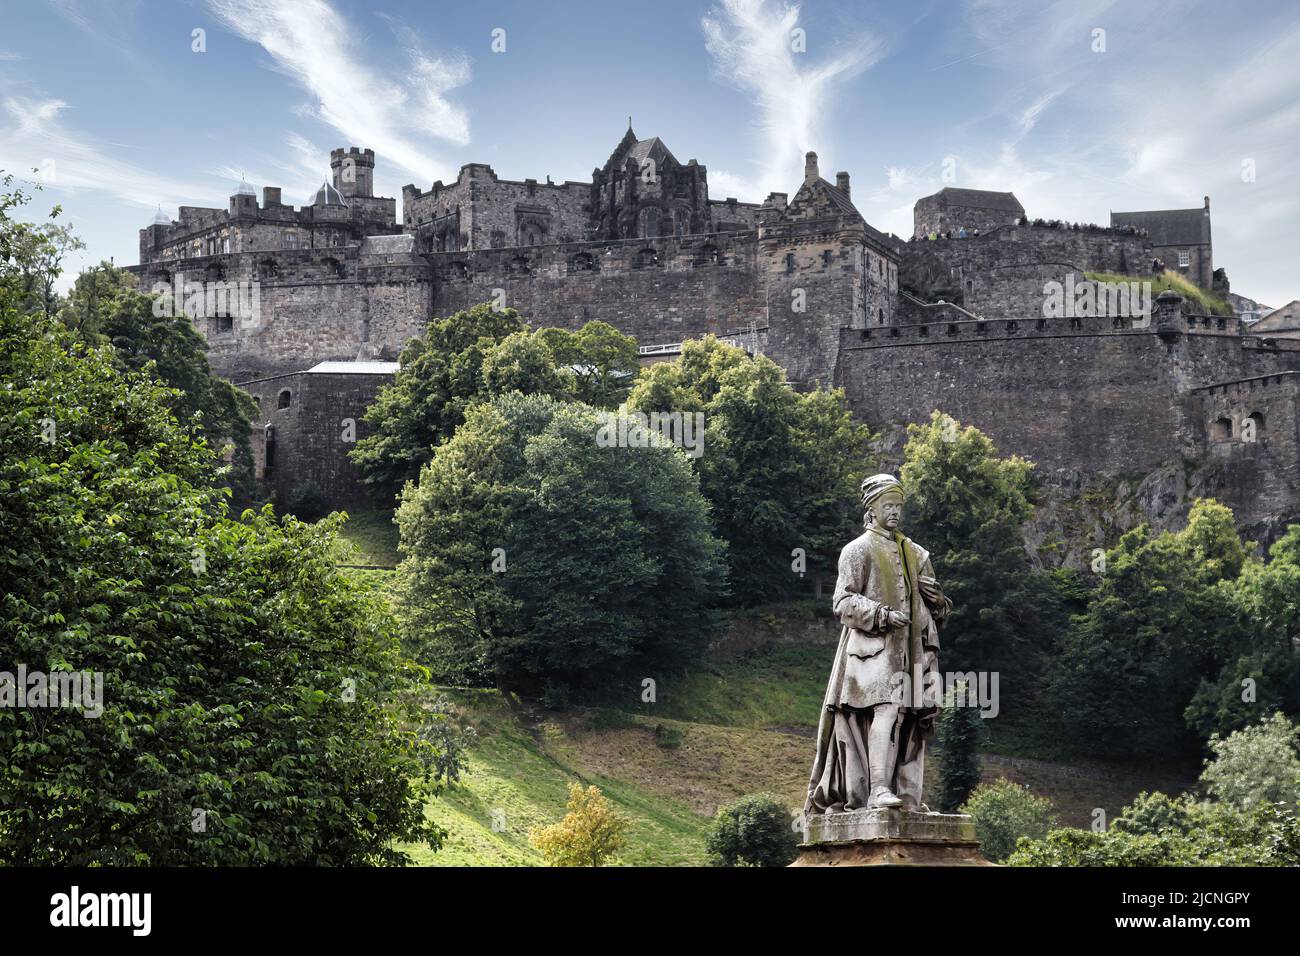 Edinburgh Castle is an ancient fortress, which from its position on top of the castle rock, dominates the panorama of the city of Edinburgh. Stock Photo